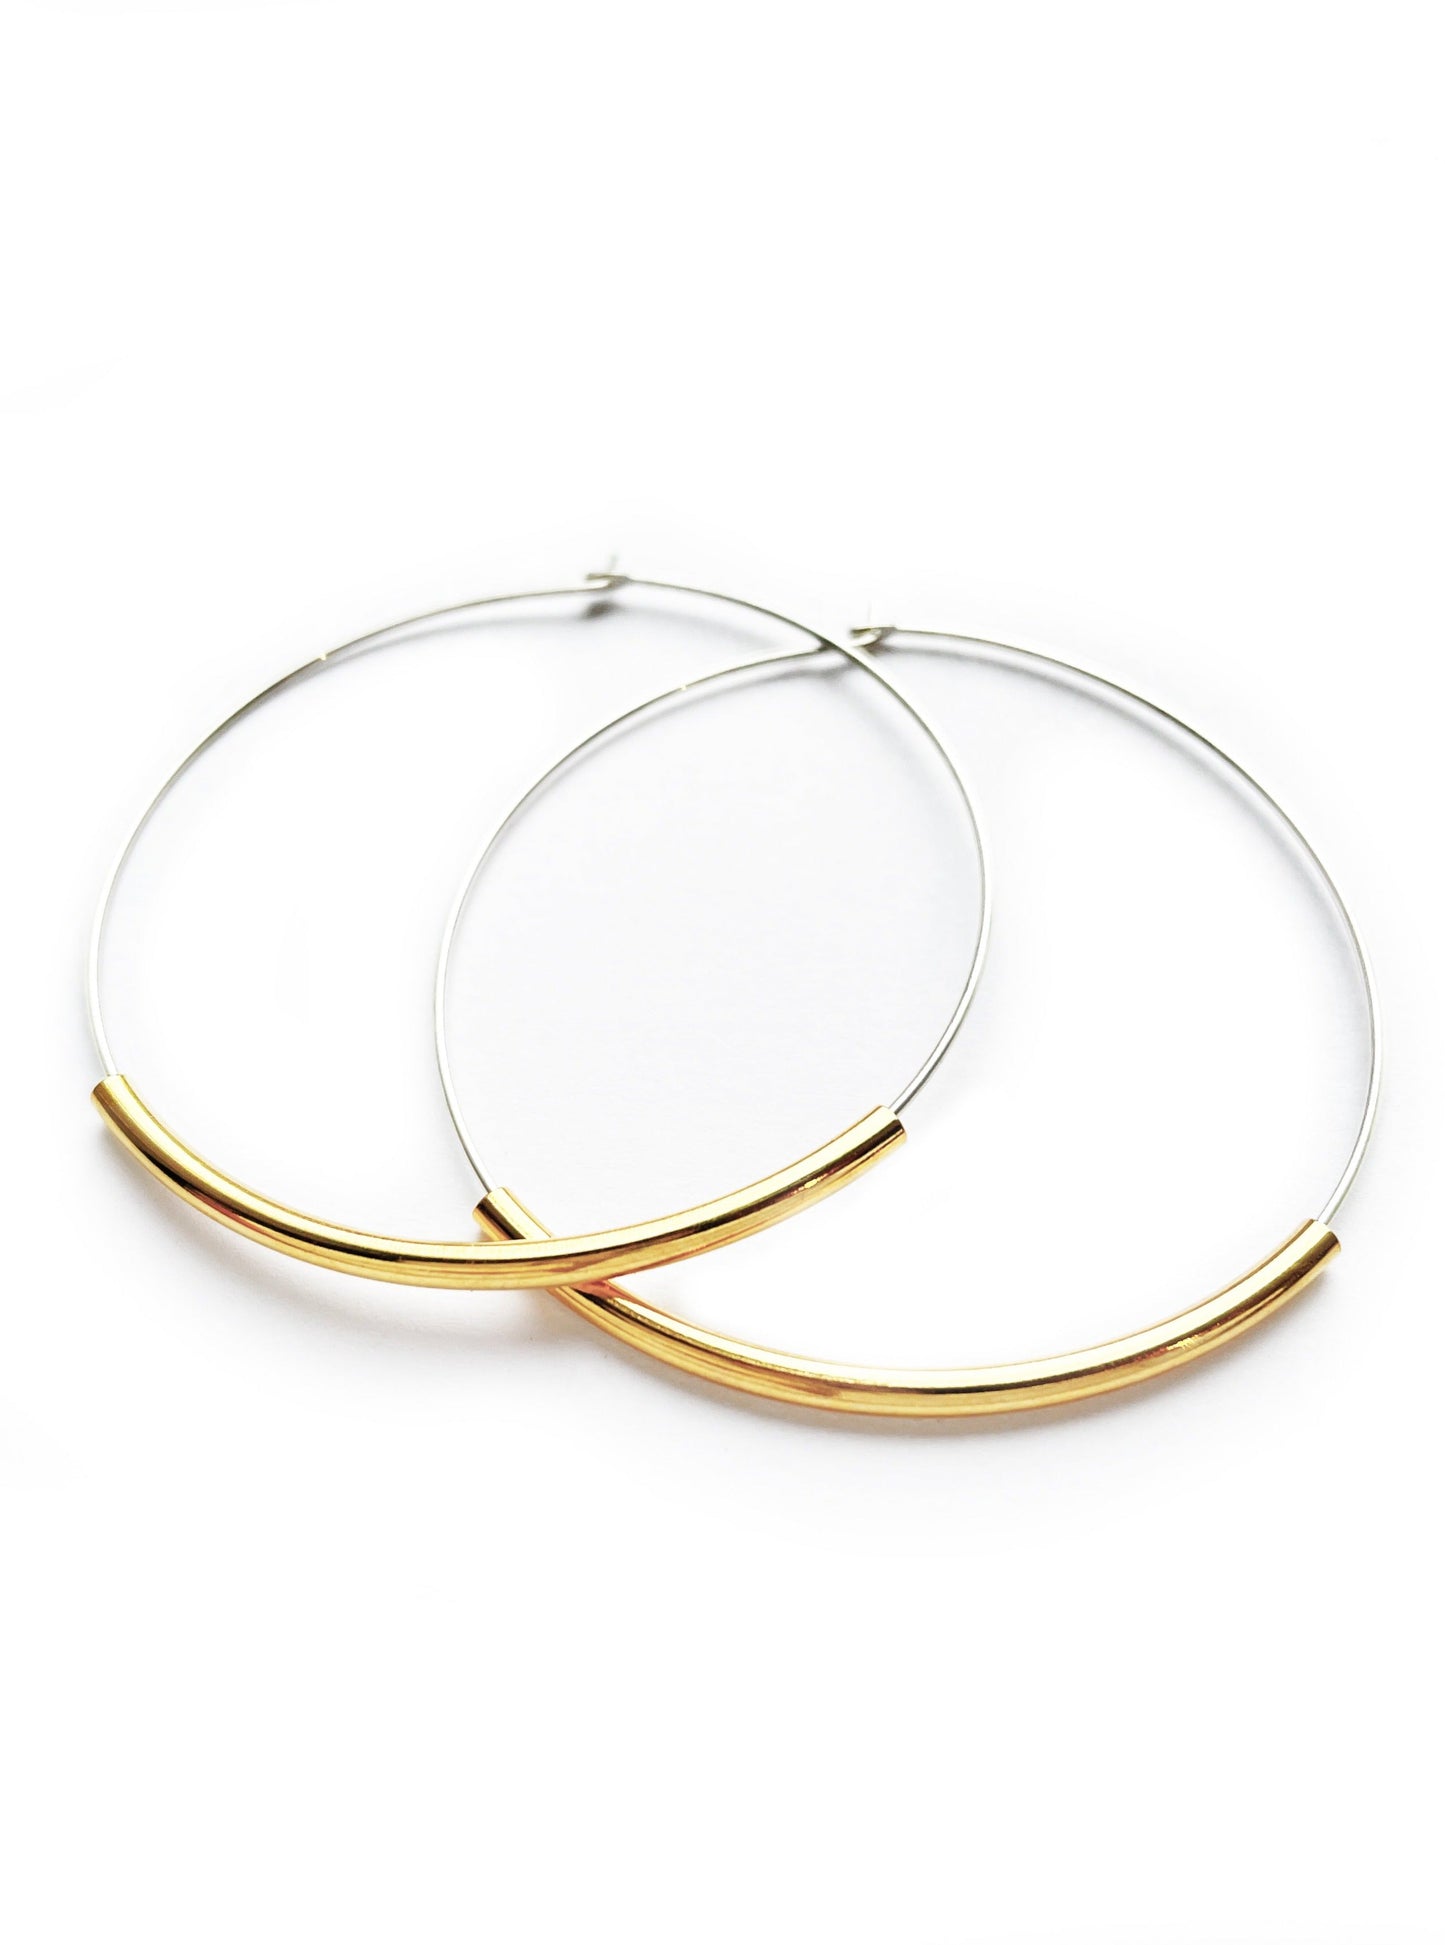 Eternity Hoops- Silver with Gold